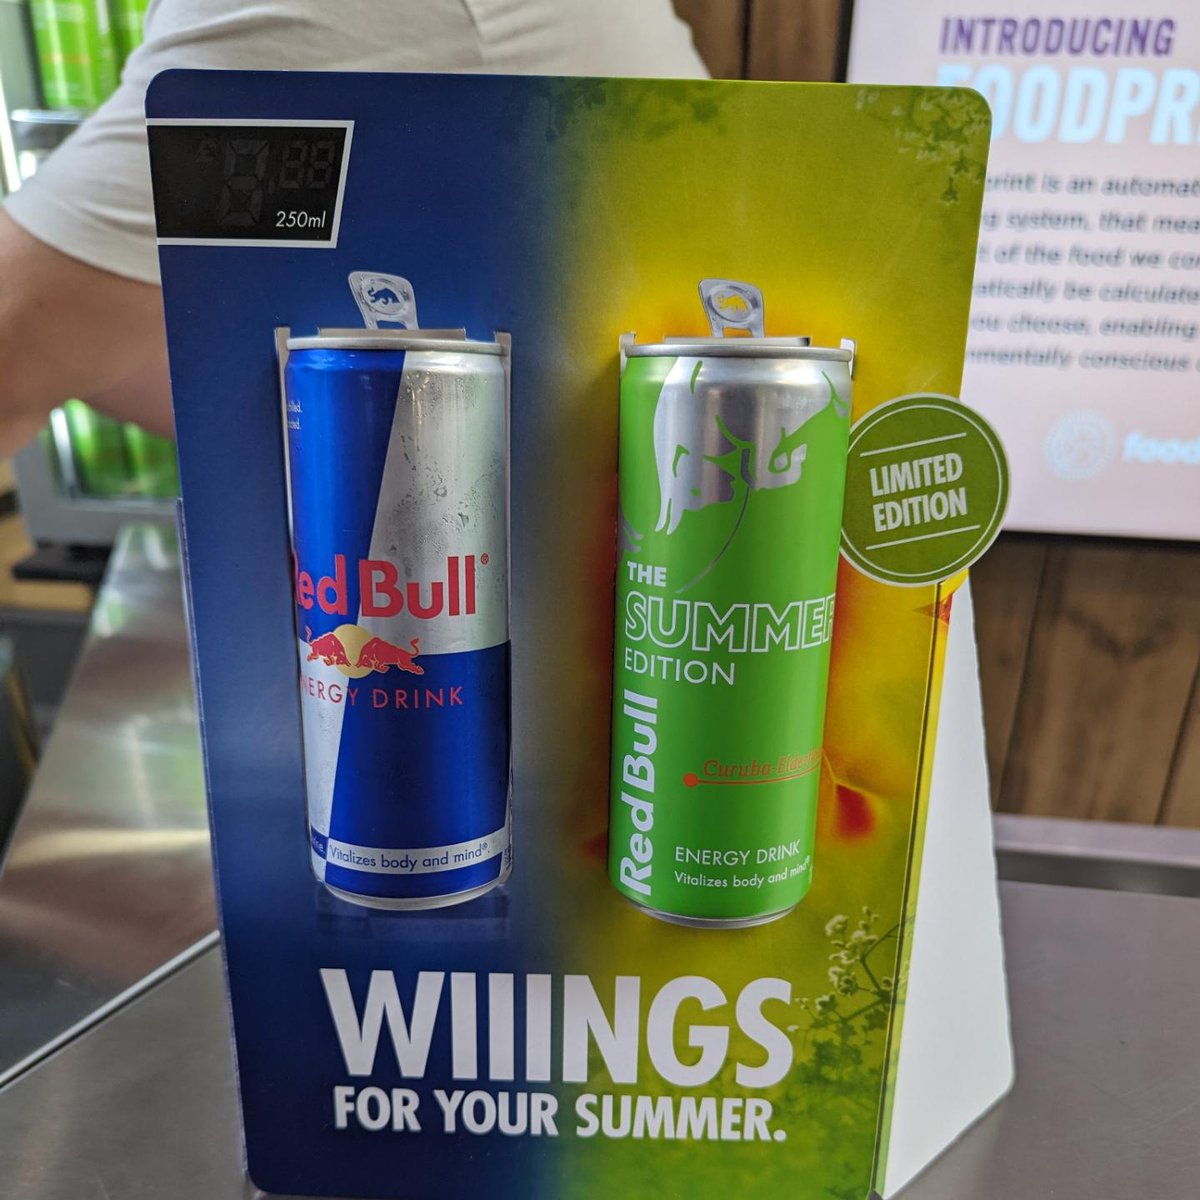 Red Bull sampling in the East Building, Docklands Campus today. Grab one while stocks last#
#redbull #summeredition #curuba #elderflower #UEL #uellife #DocklandsCampus